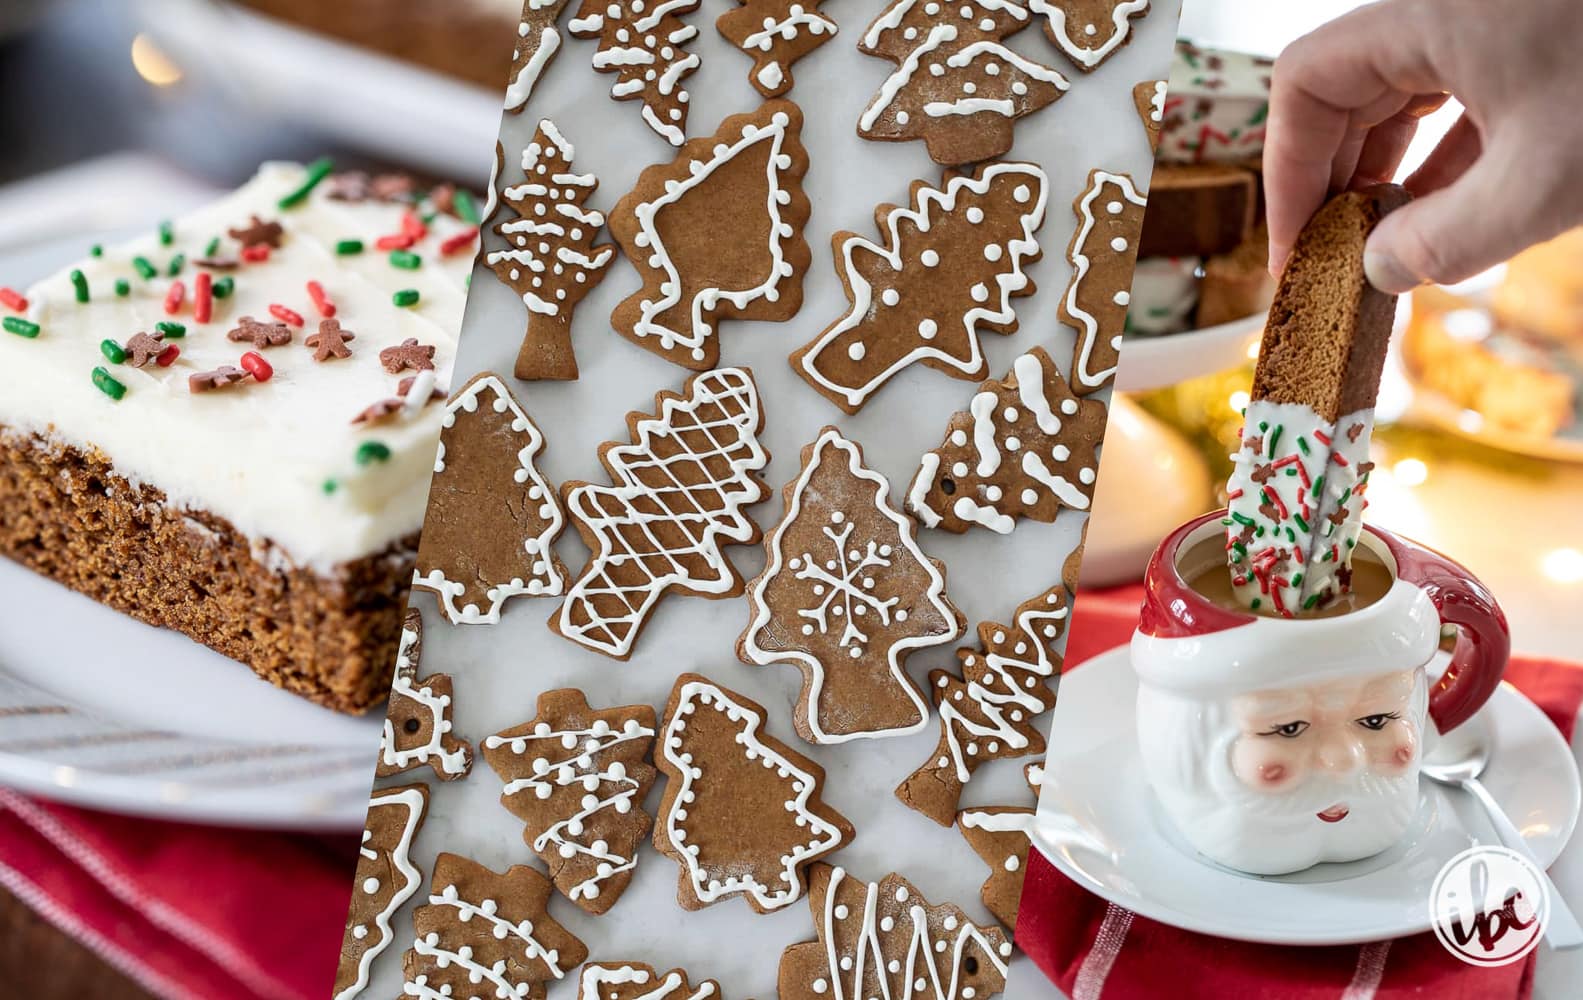 Gingerbread Recipes to Spice Up This Holiday Season